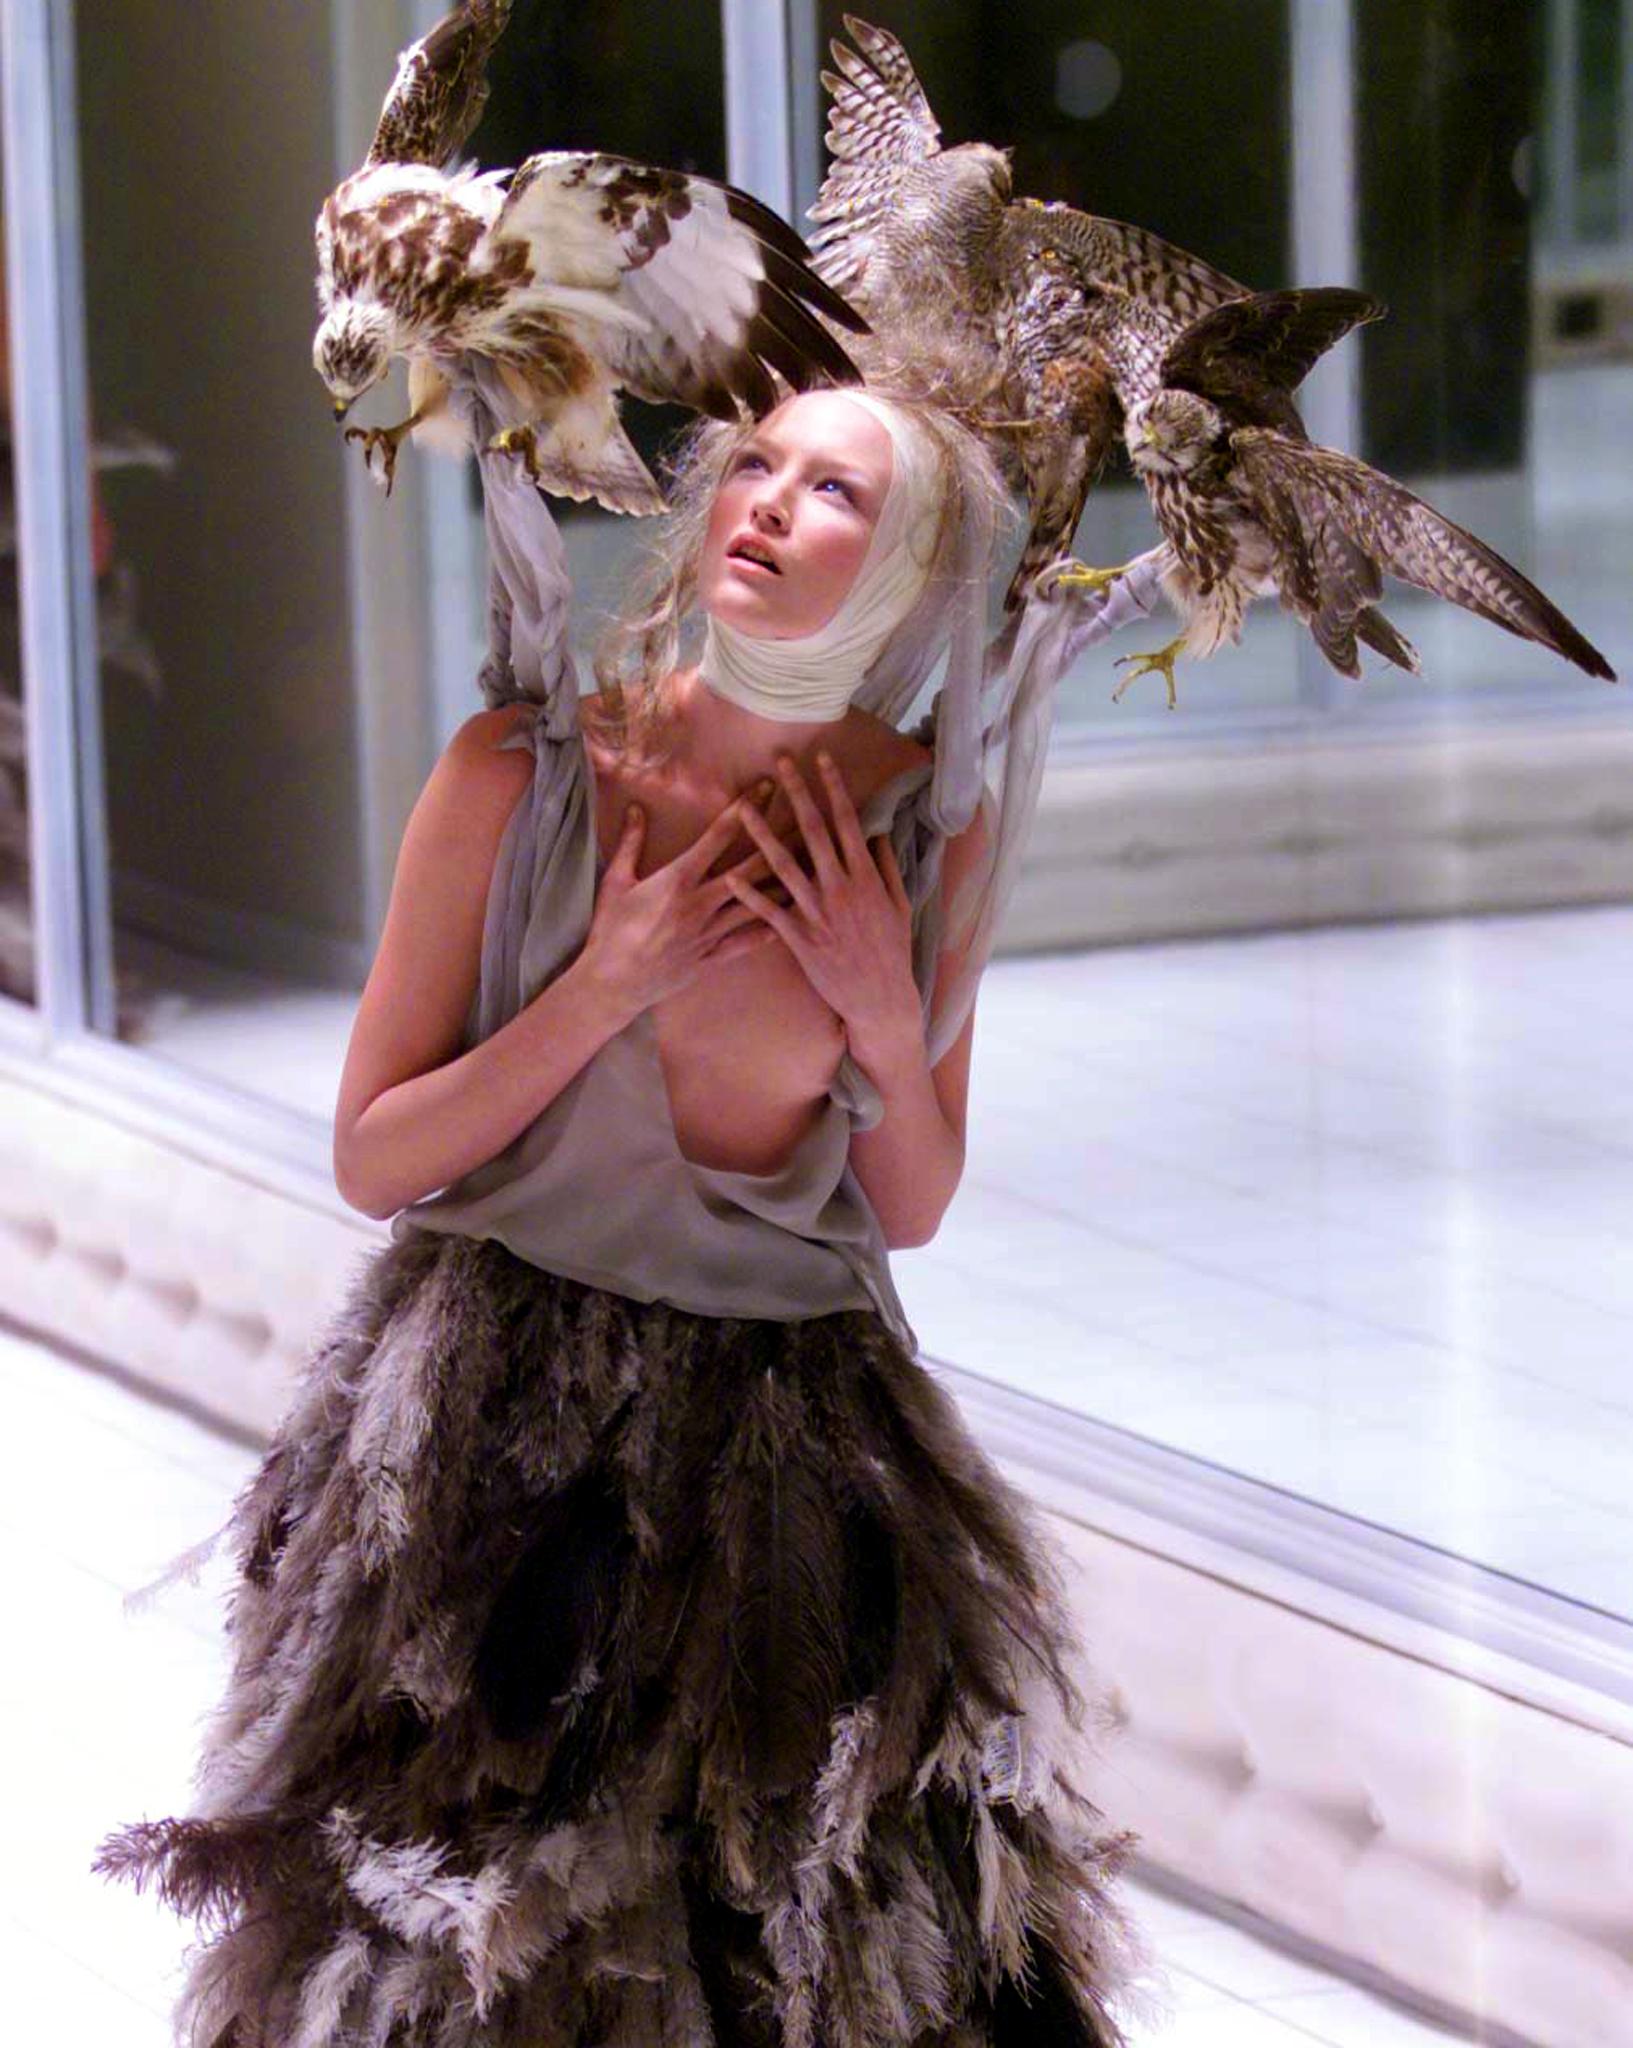 A young white model with her head wrapped in white fabric, with taxidermy birds on her shoulders.